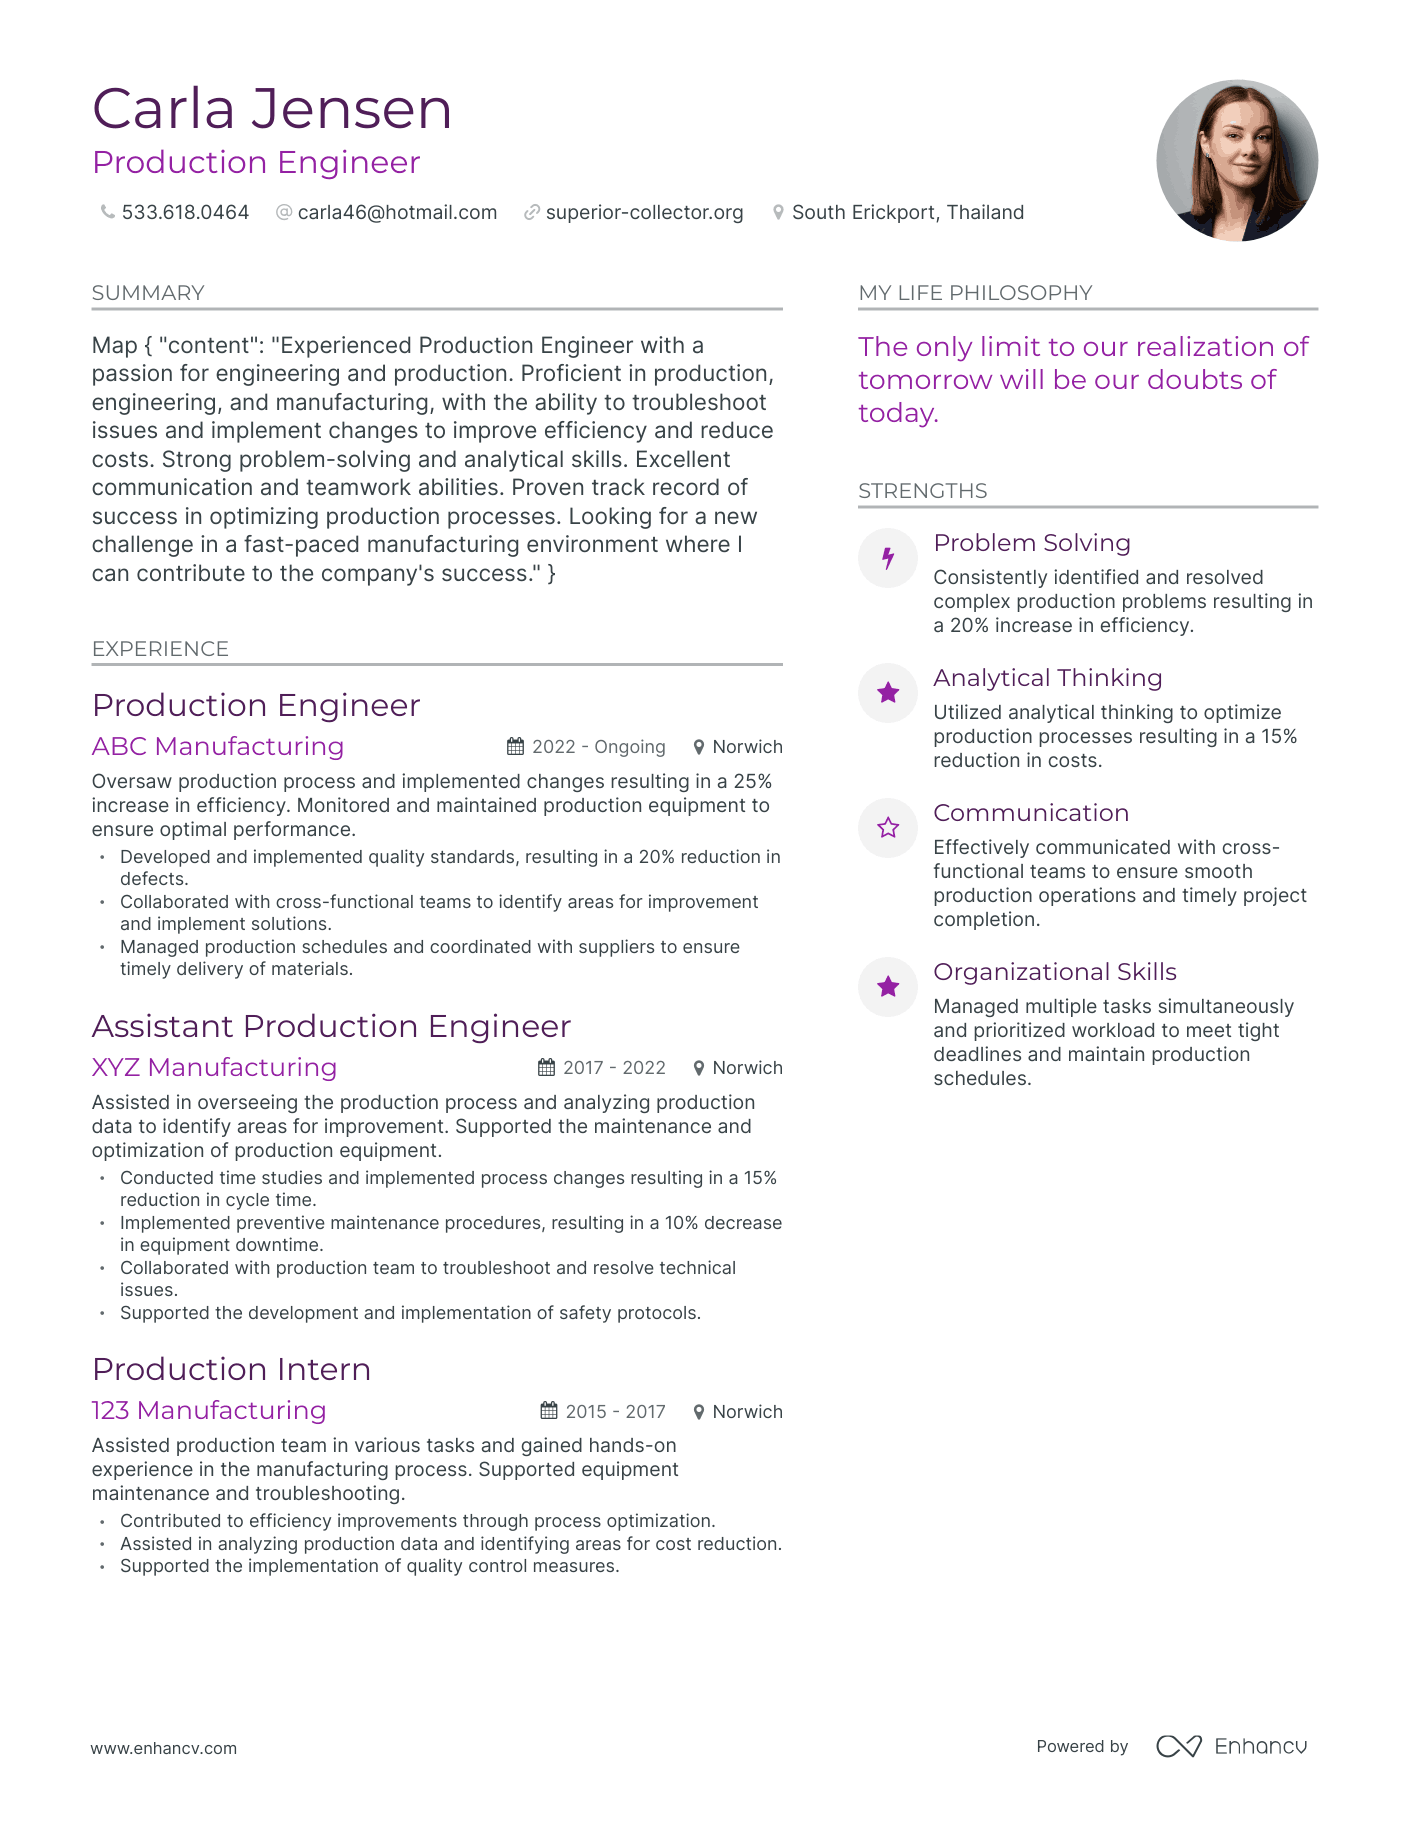 Production Engineer resume example